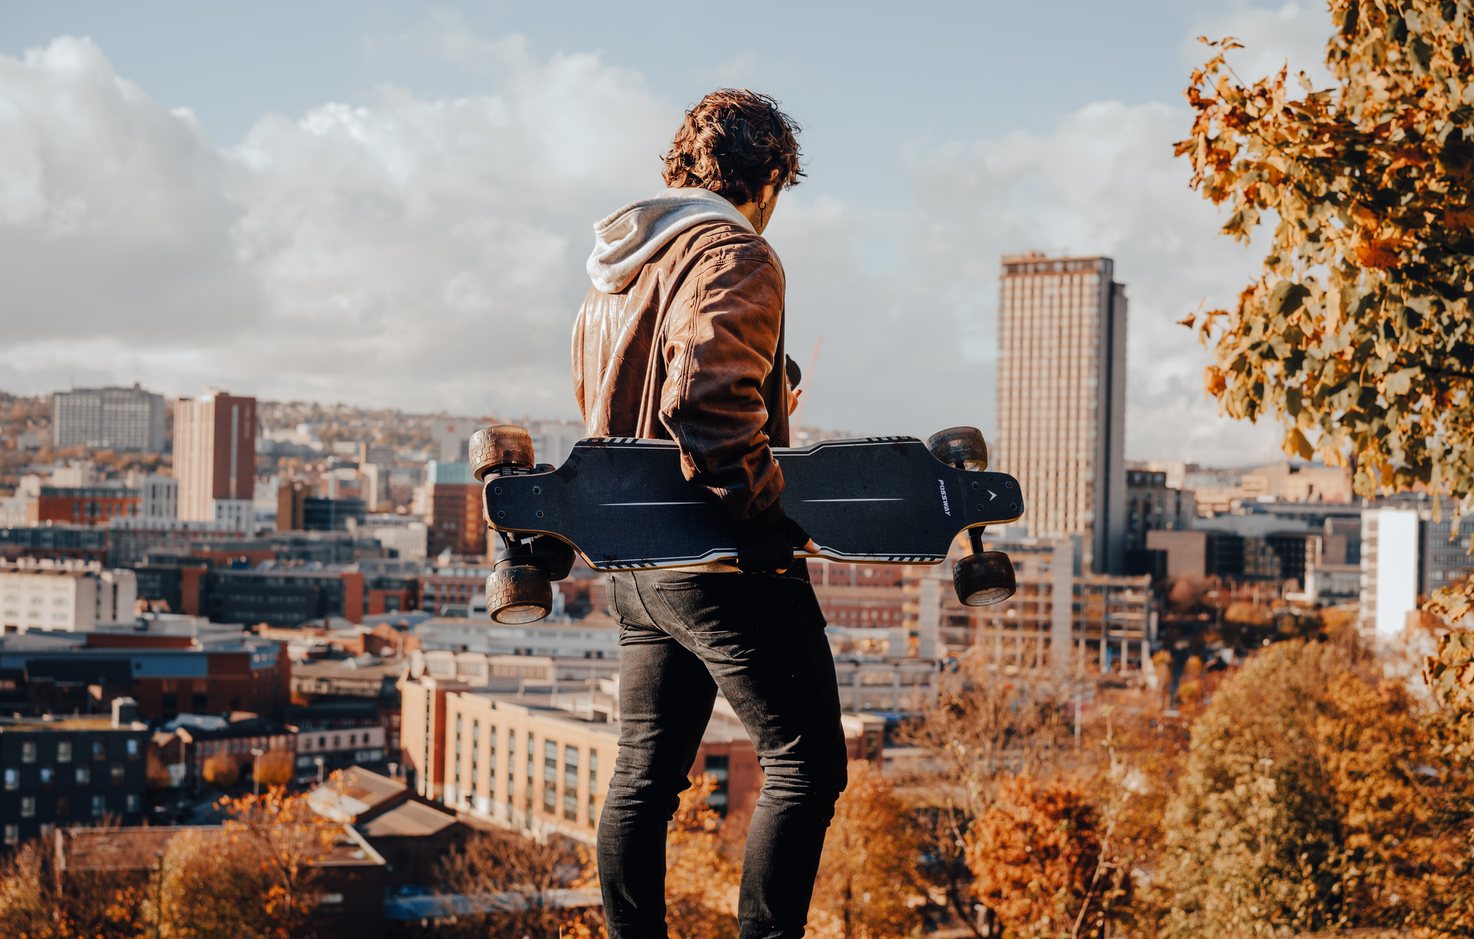 Which electric skateboard should I buy for commuting?